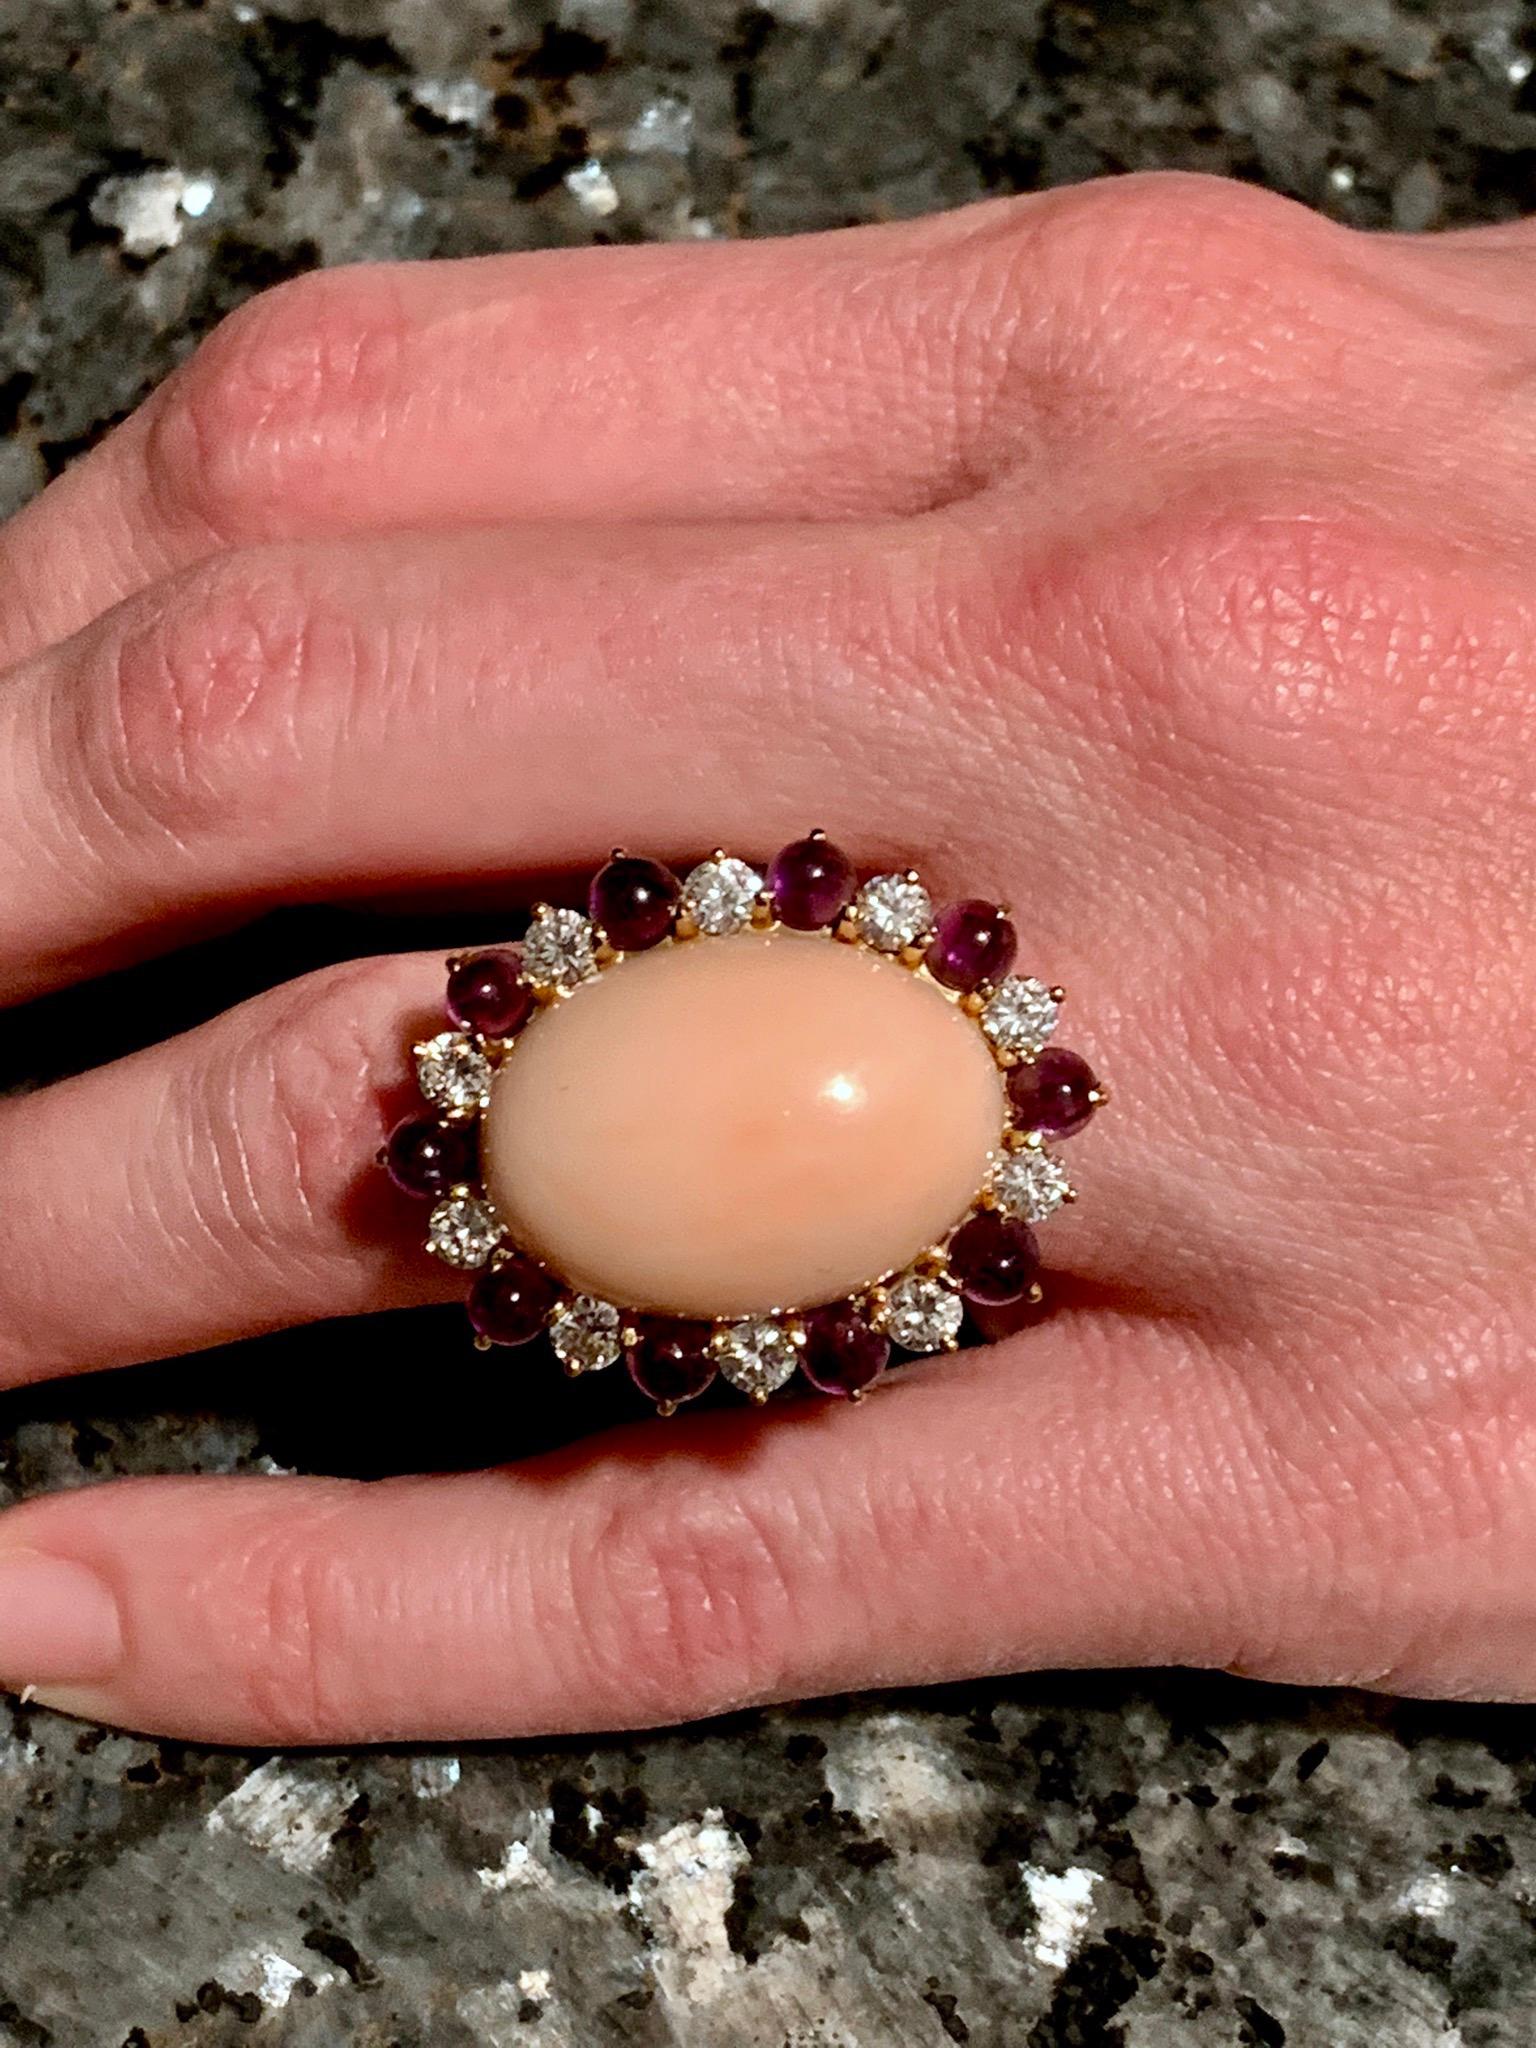 Oval Cut Gemolithos Pink Coral Amethyst and Diamond Ring, 1960s For Sale